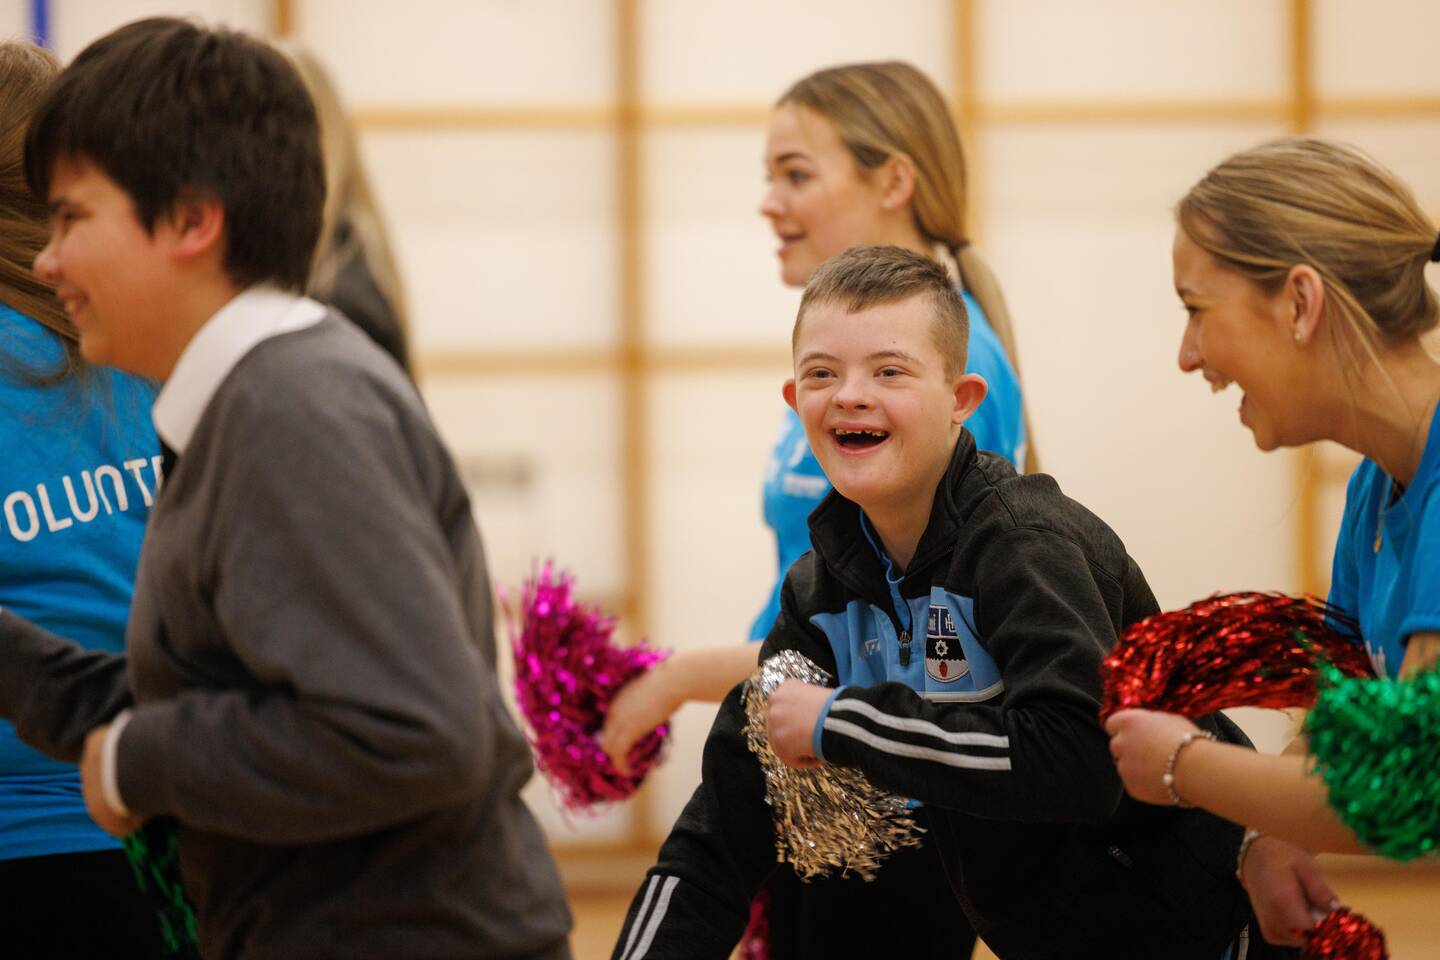 Group of disabled and non-disabled people taking part in a dance using pom poms in a sports hall.